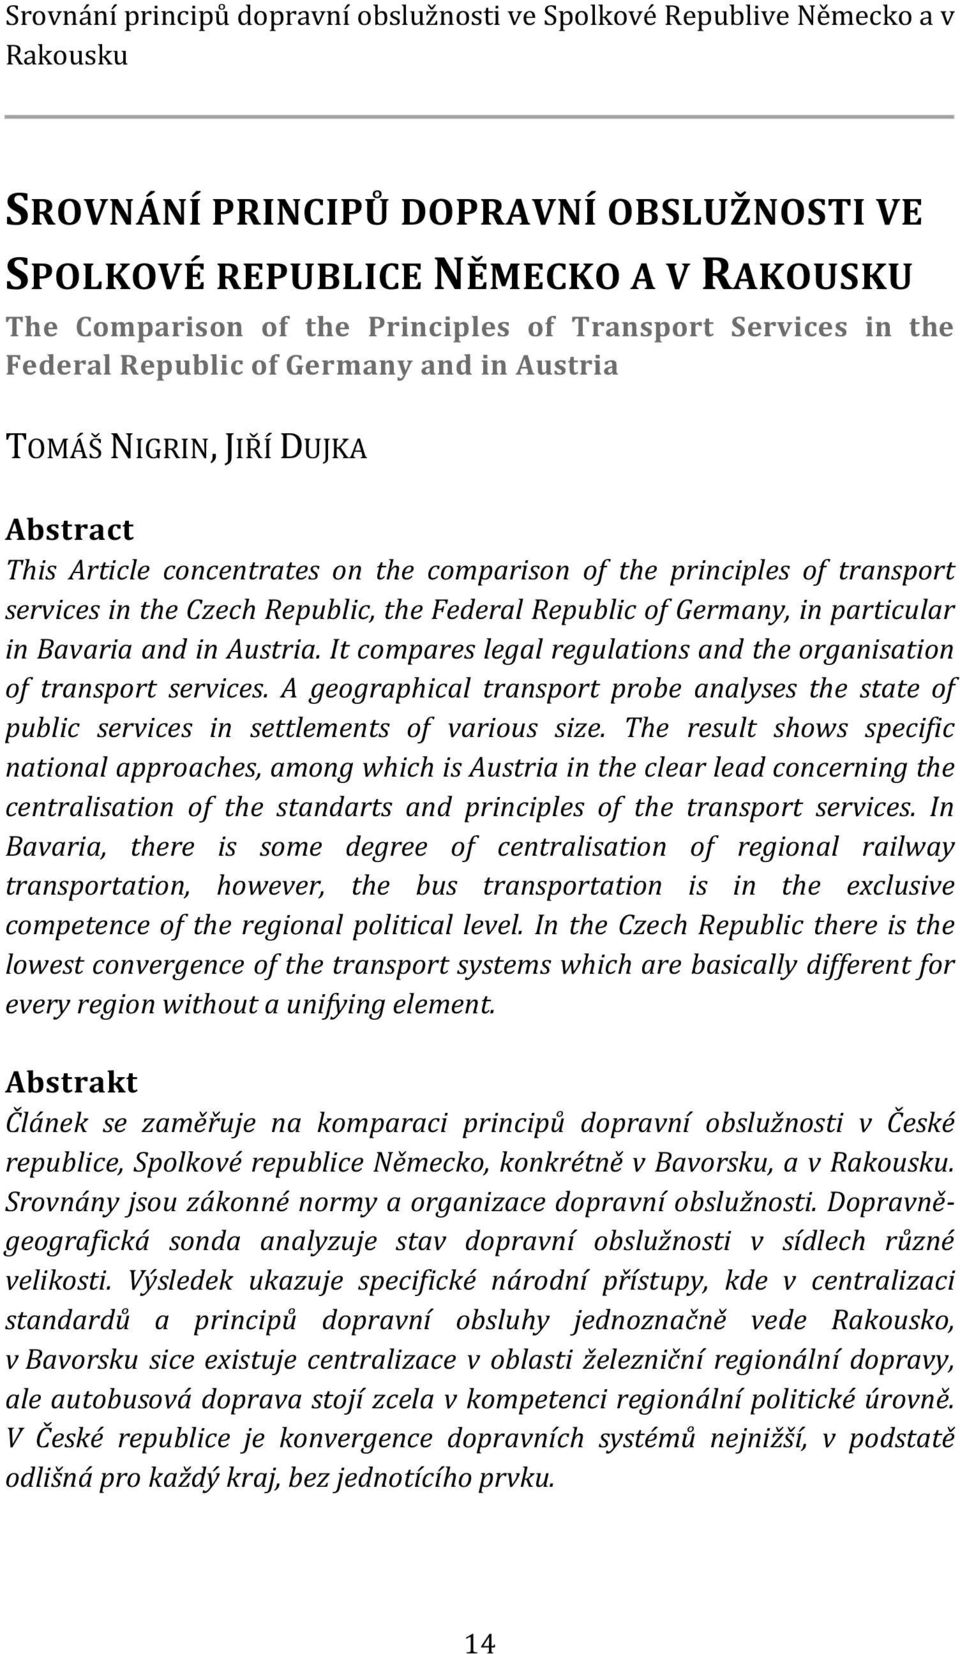 Republic, the Federal Republic of Germany, in particular in Bavaria and in Austria. It compares legal regulations and the organisation of transport services.